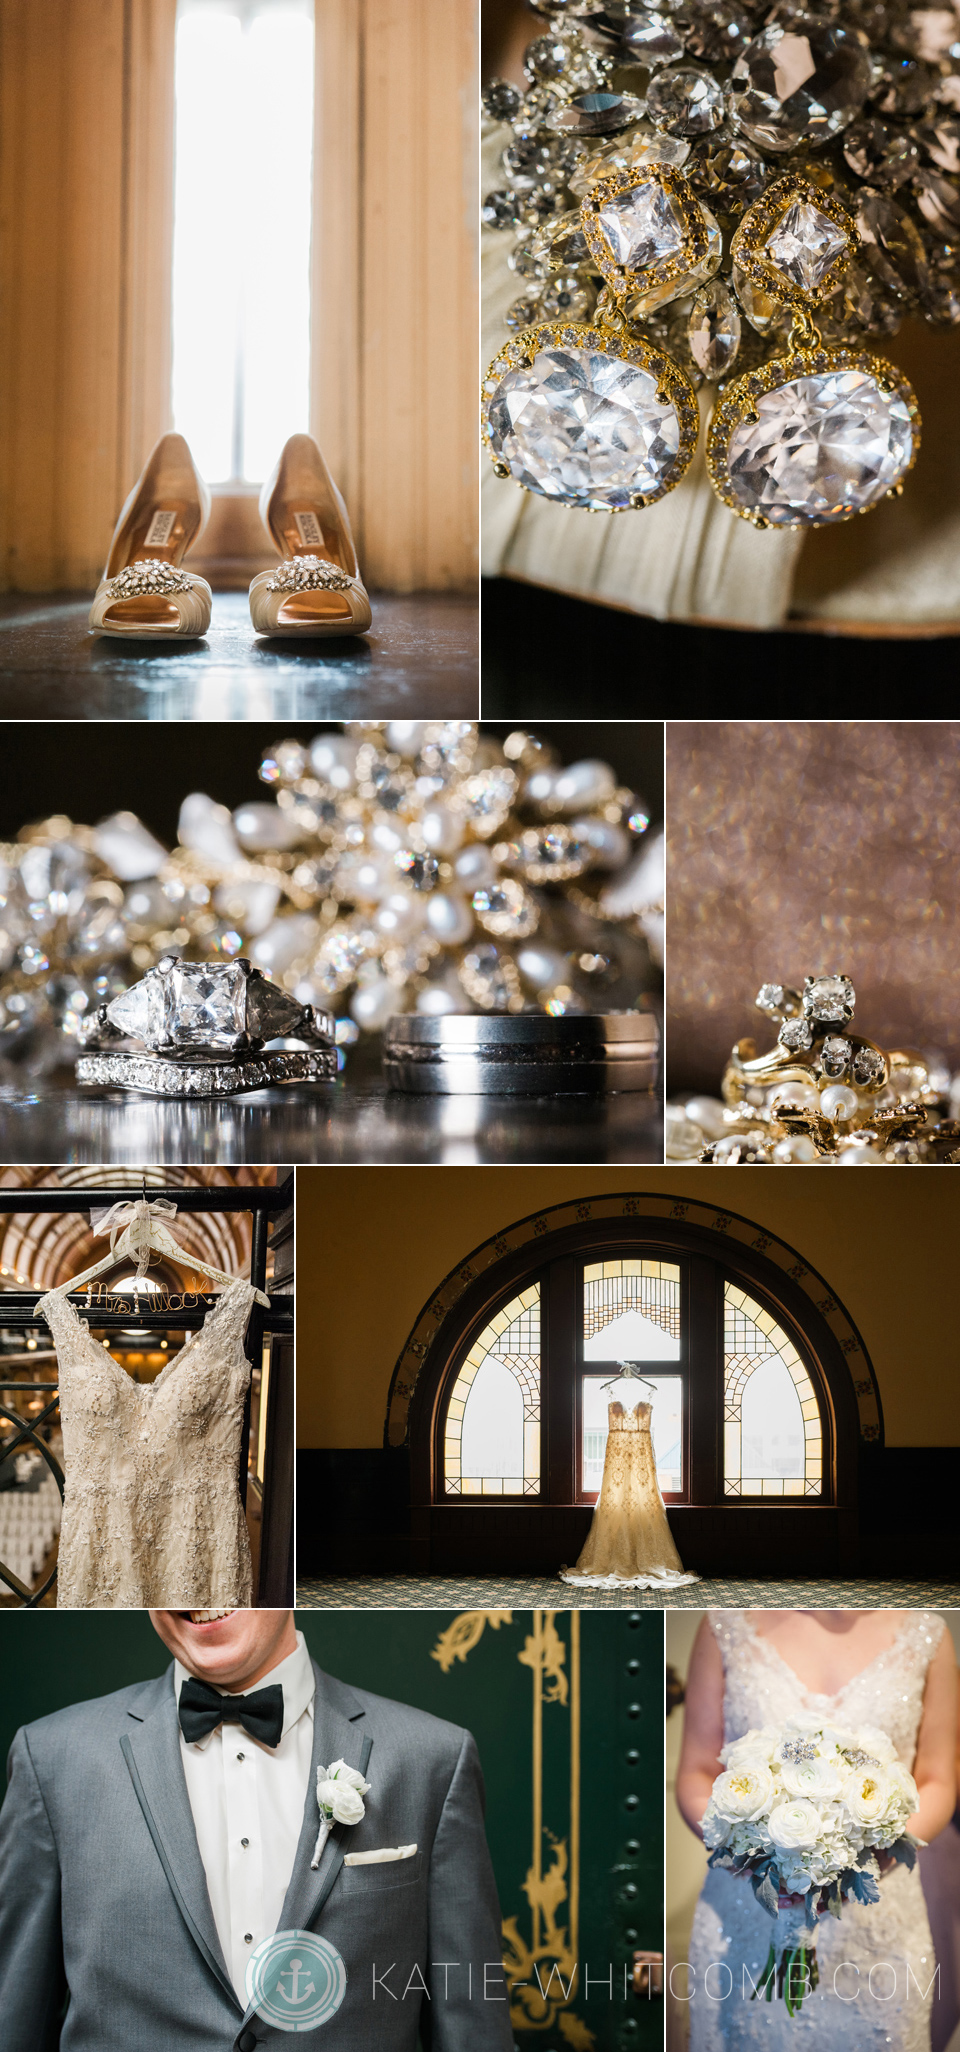 bride's wedding details for her winter wedding at crown plaza indianpolis